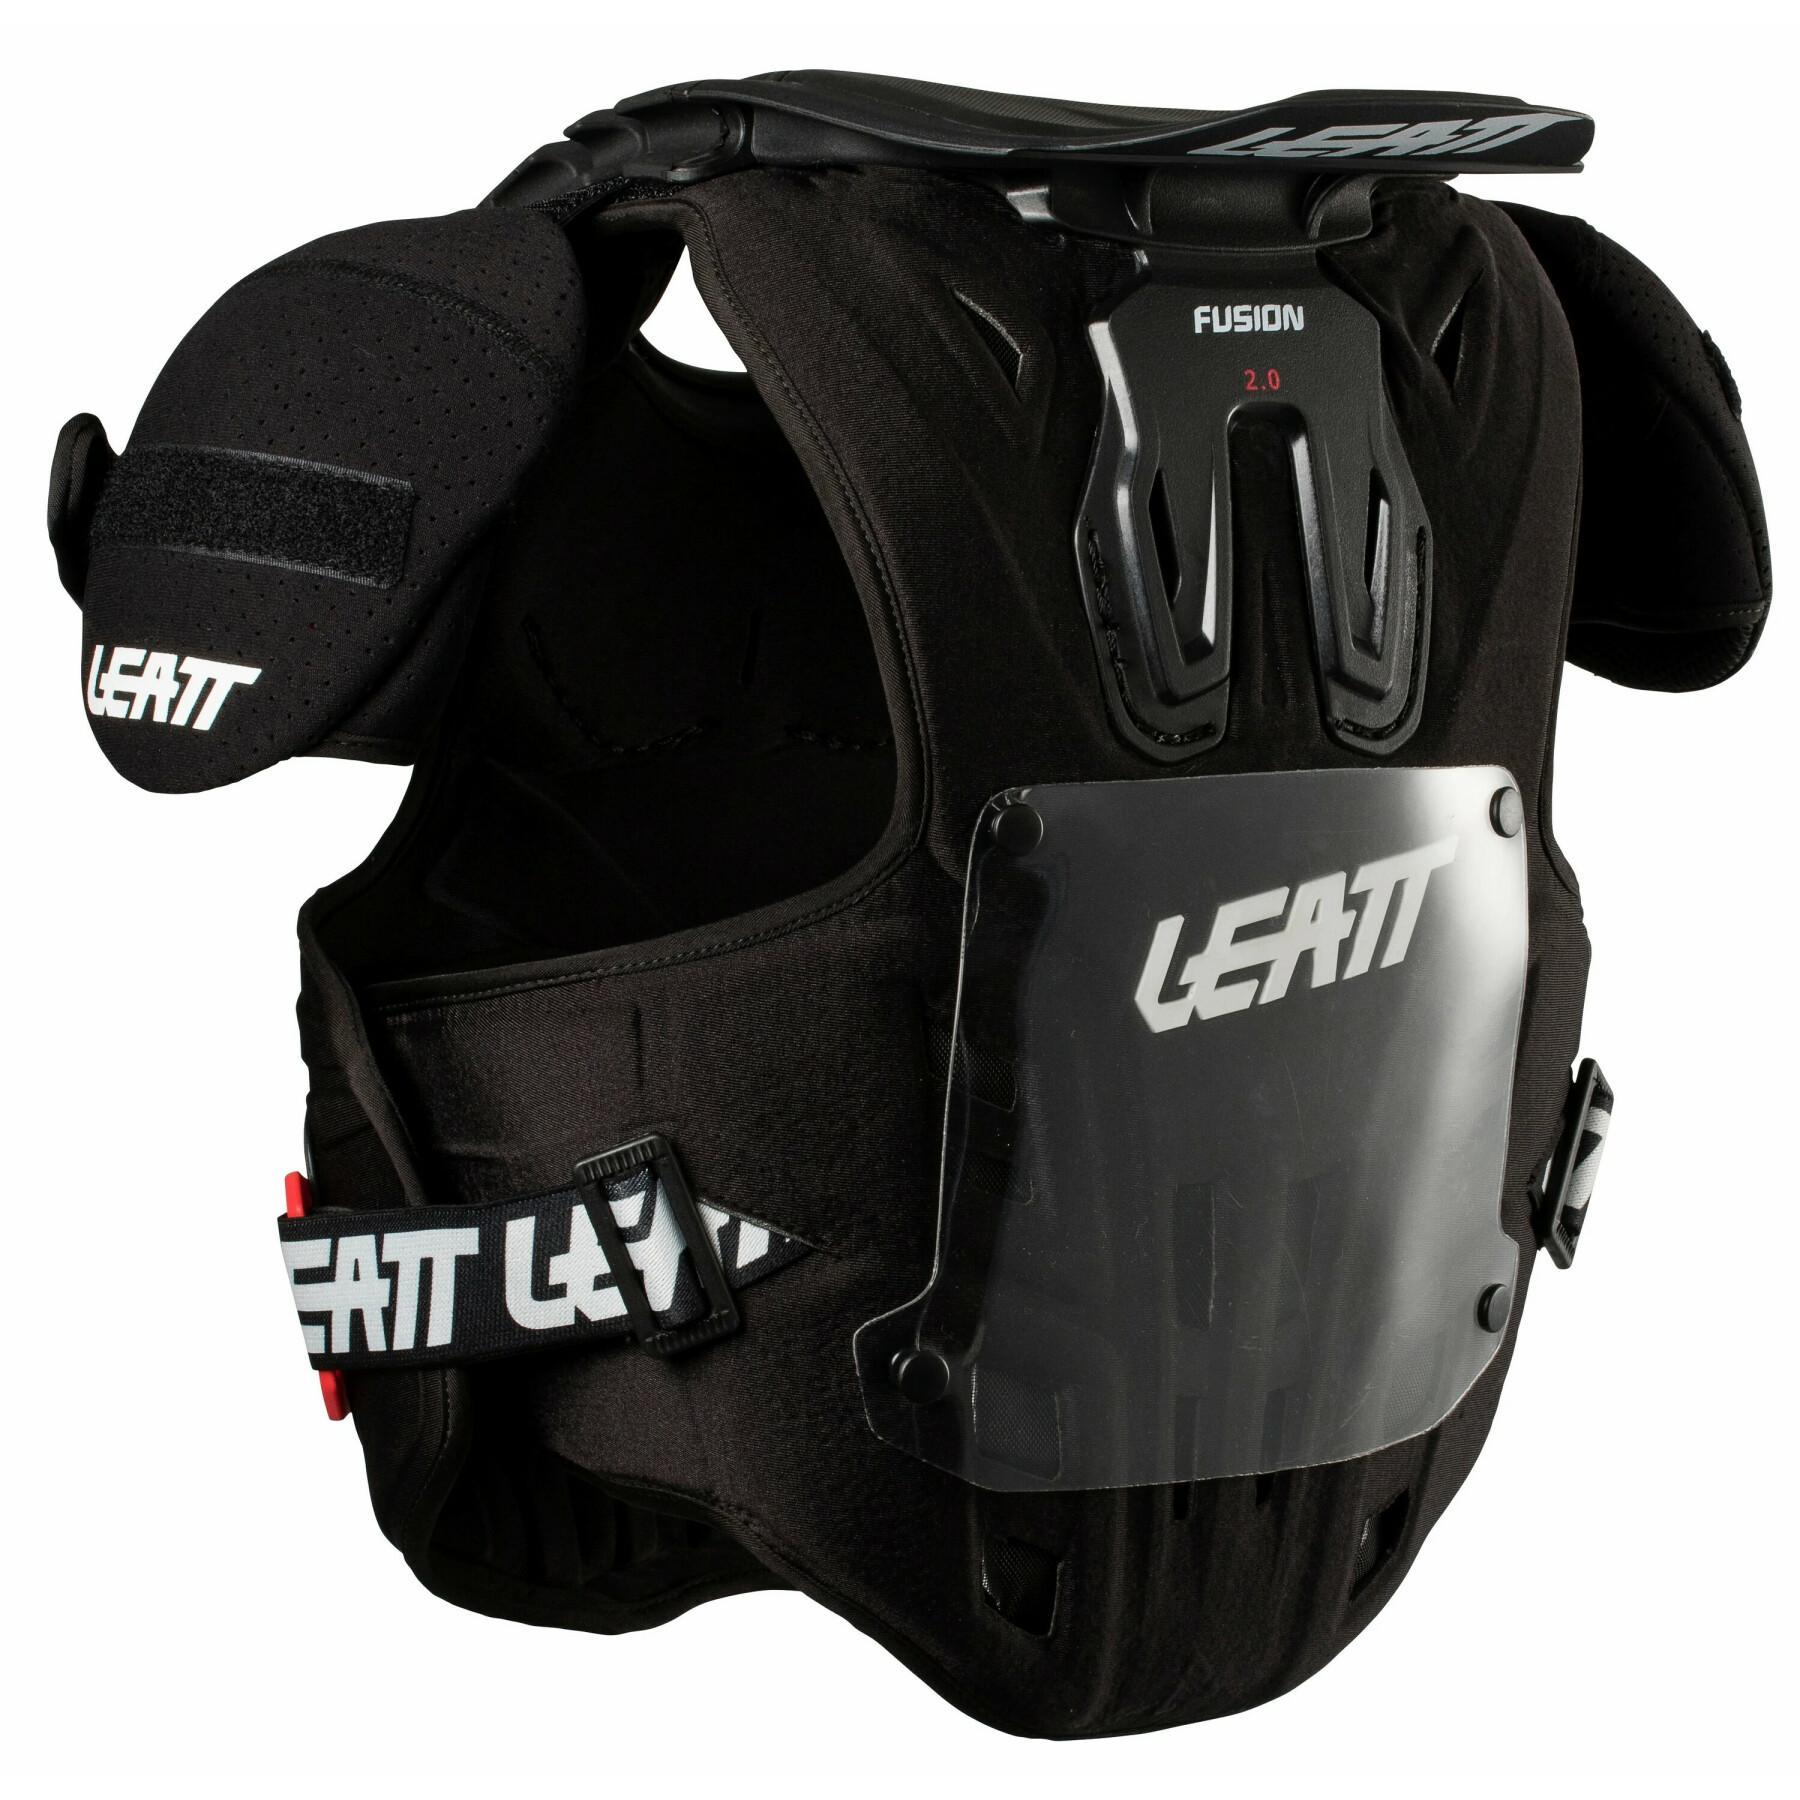 Child's motorcycle chest protector Leatt 2.0